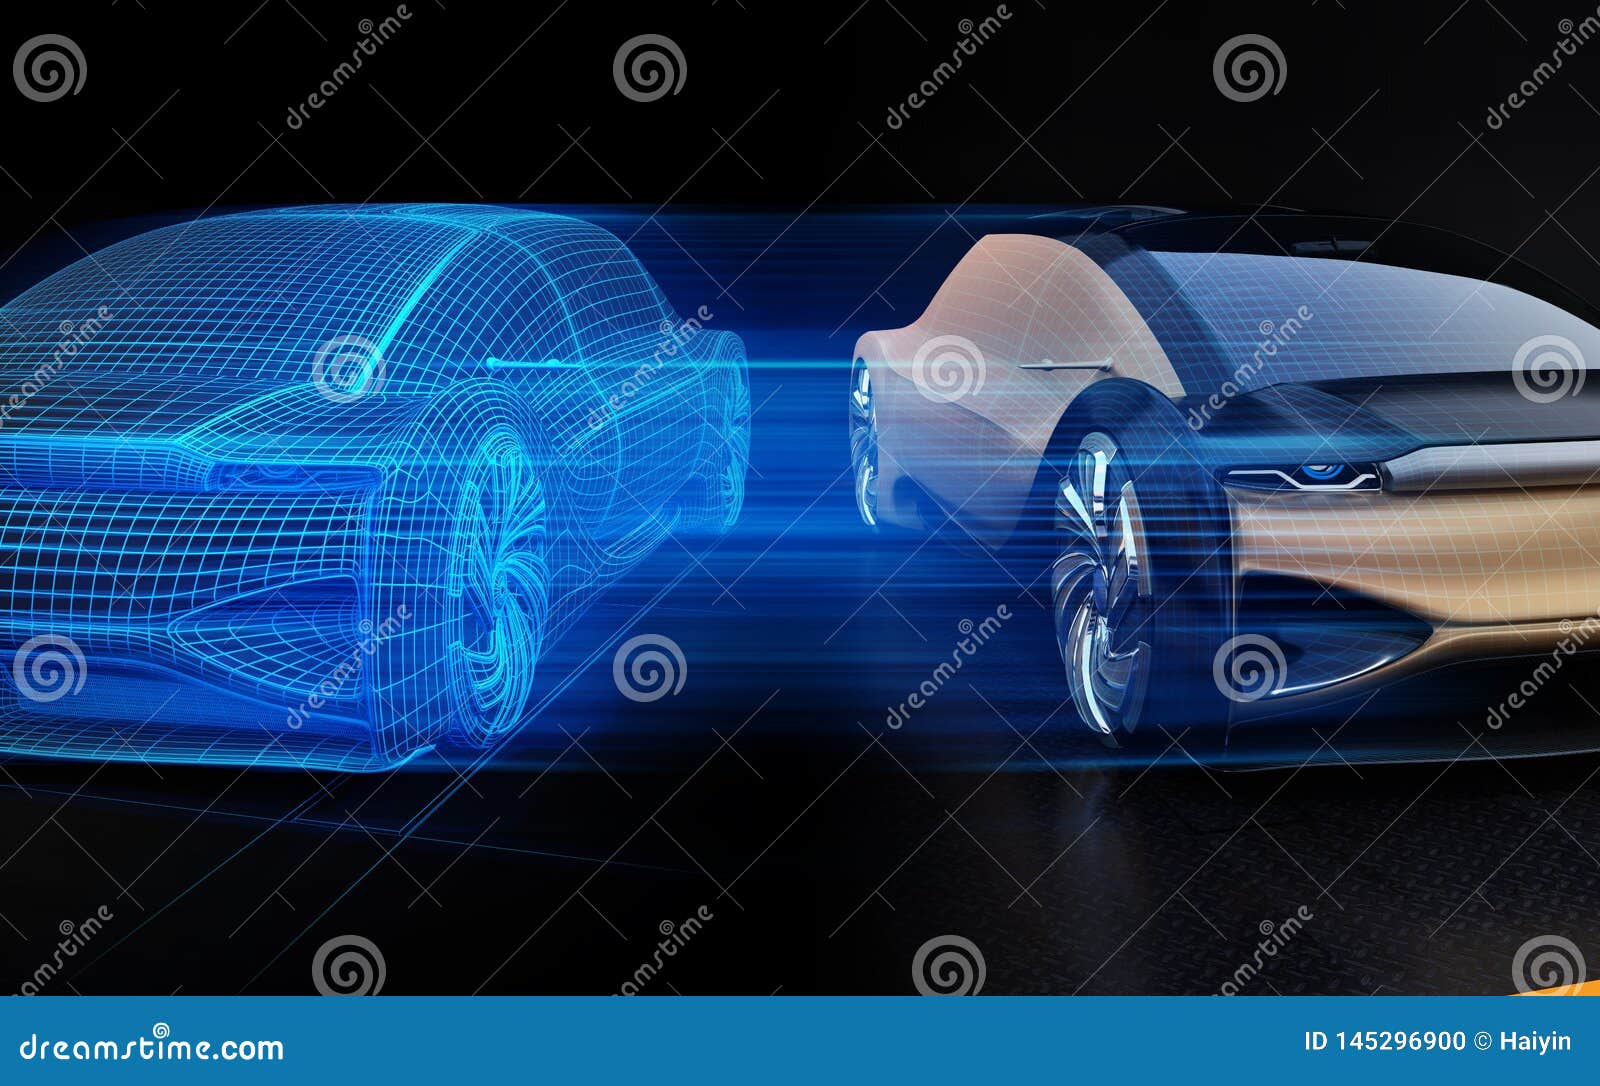 autonomous electric car and wireframe rendering of the car body on right side